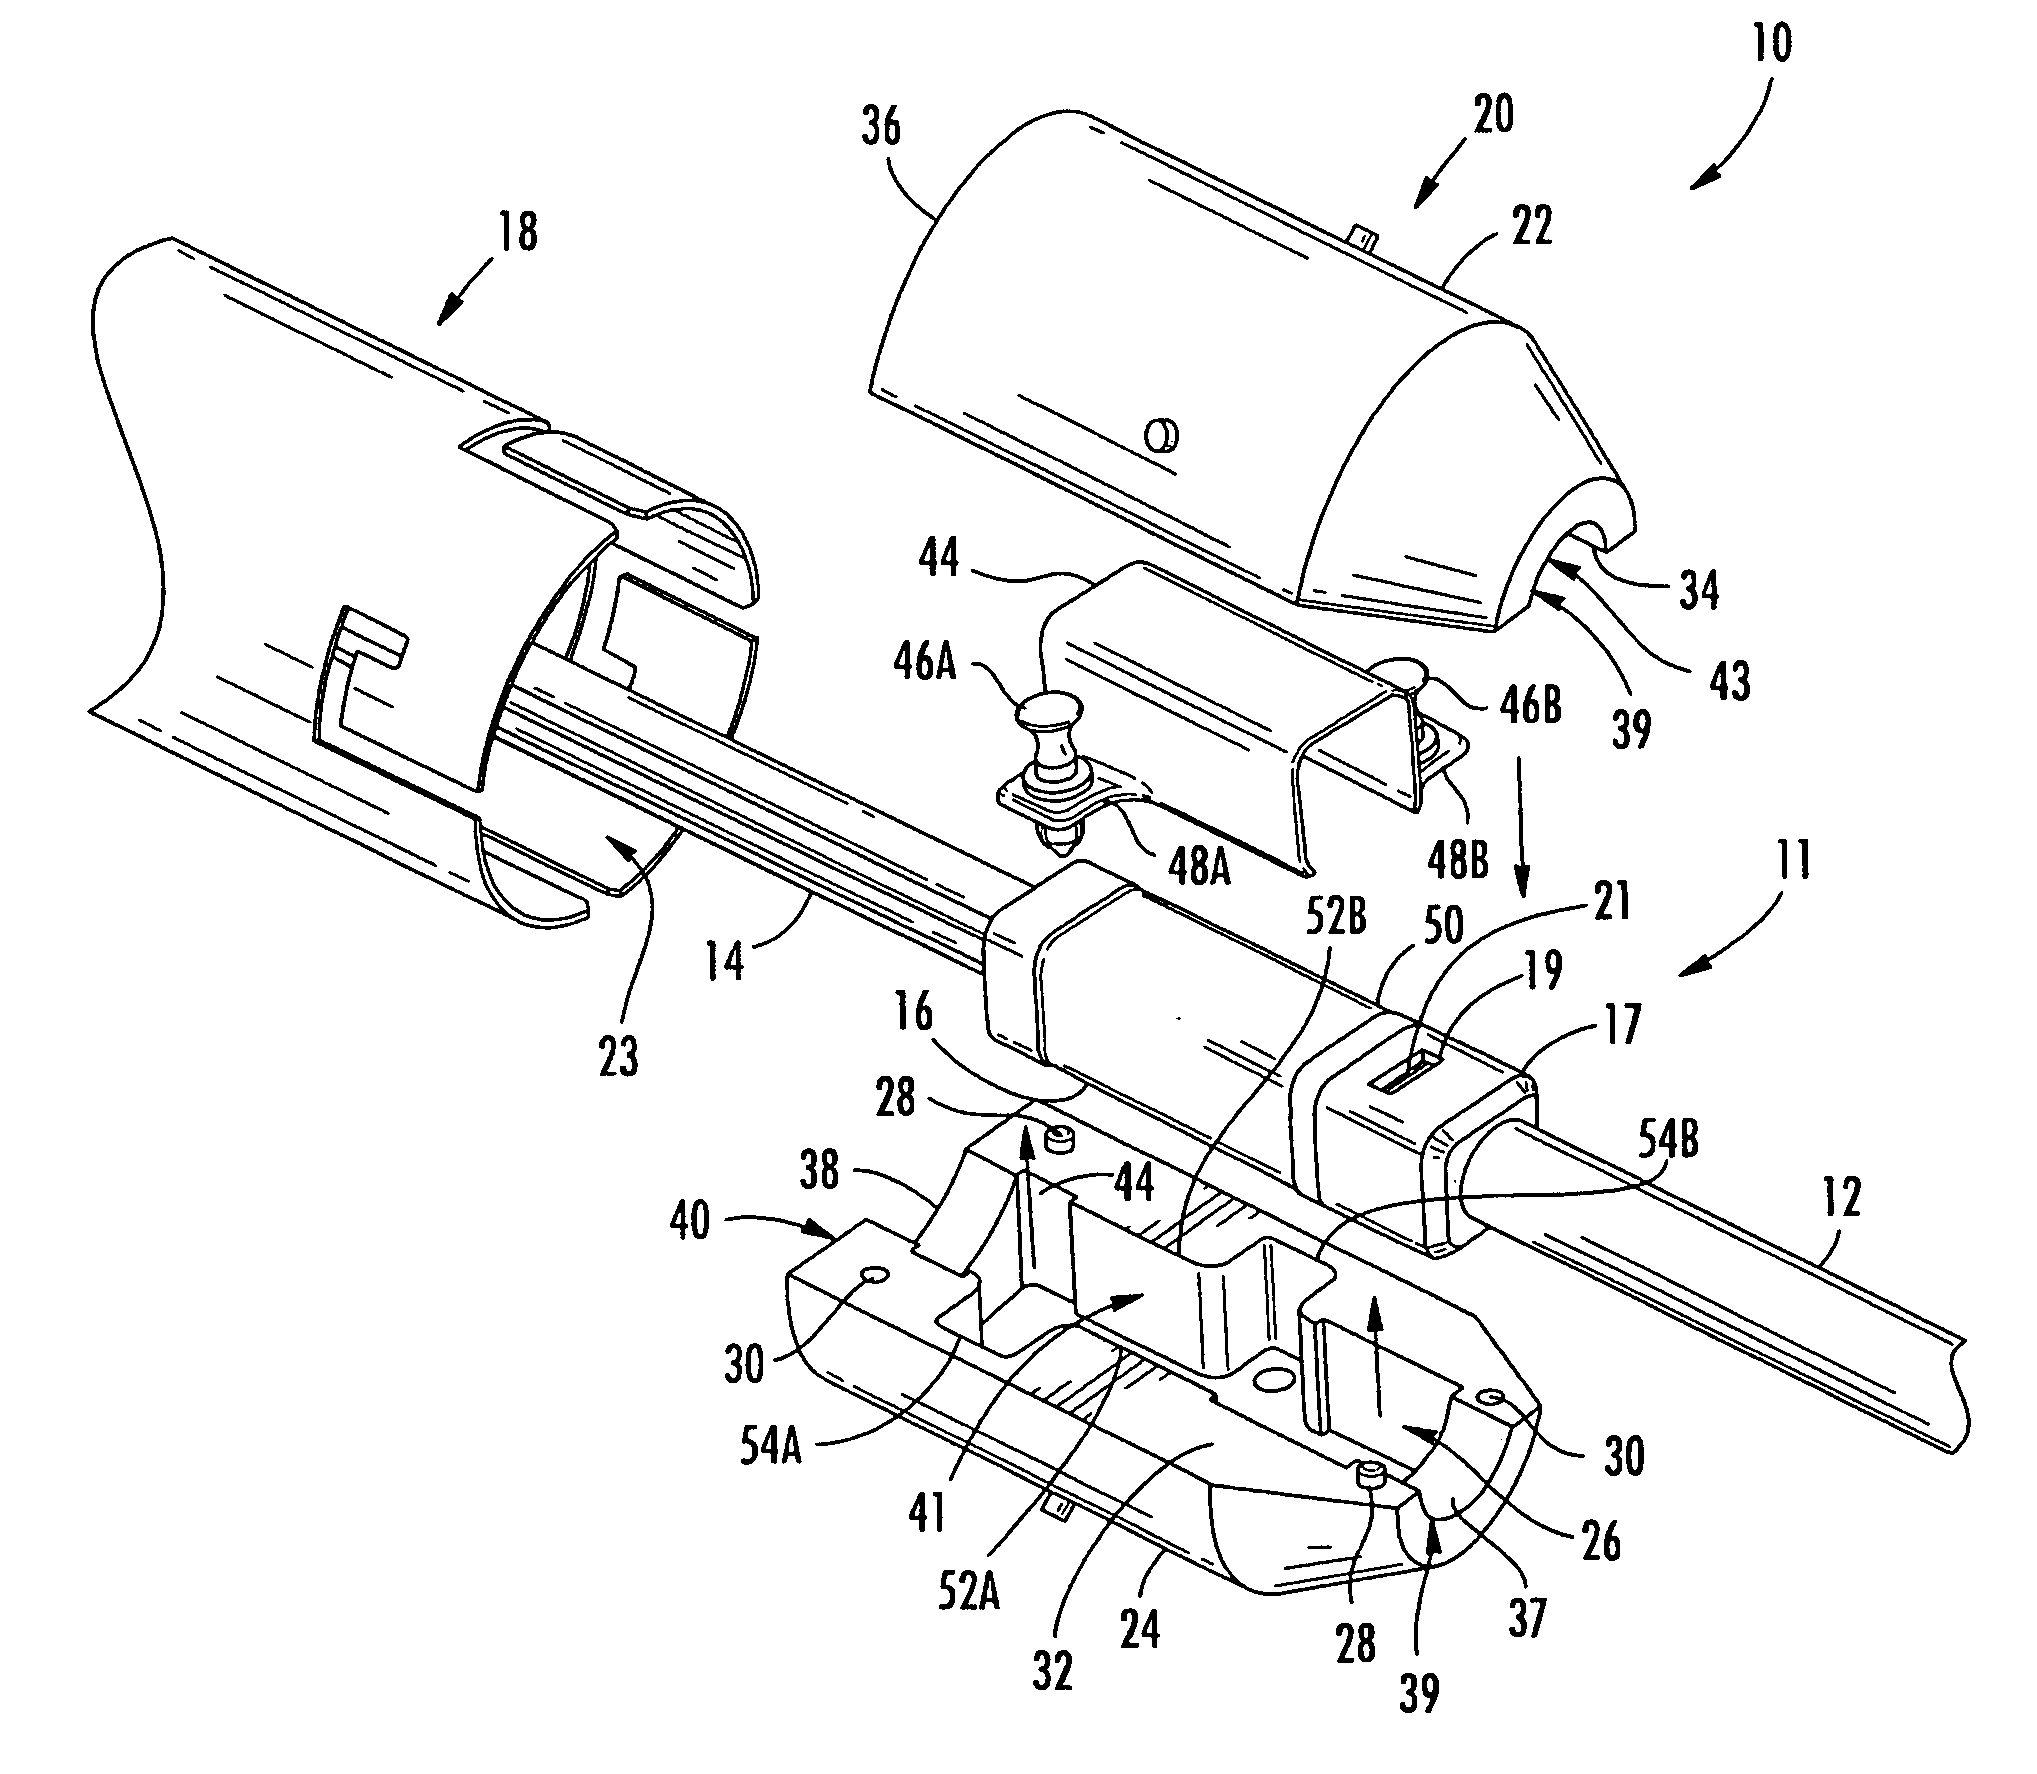 Pulling Grip Assembly for a Fiber Optic Assembly